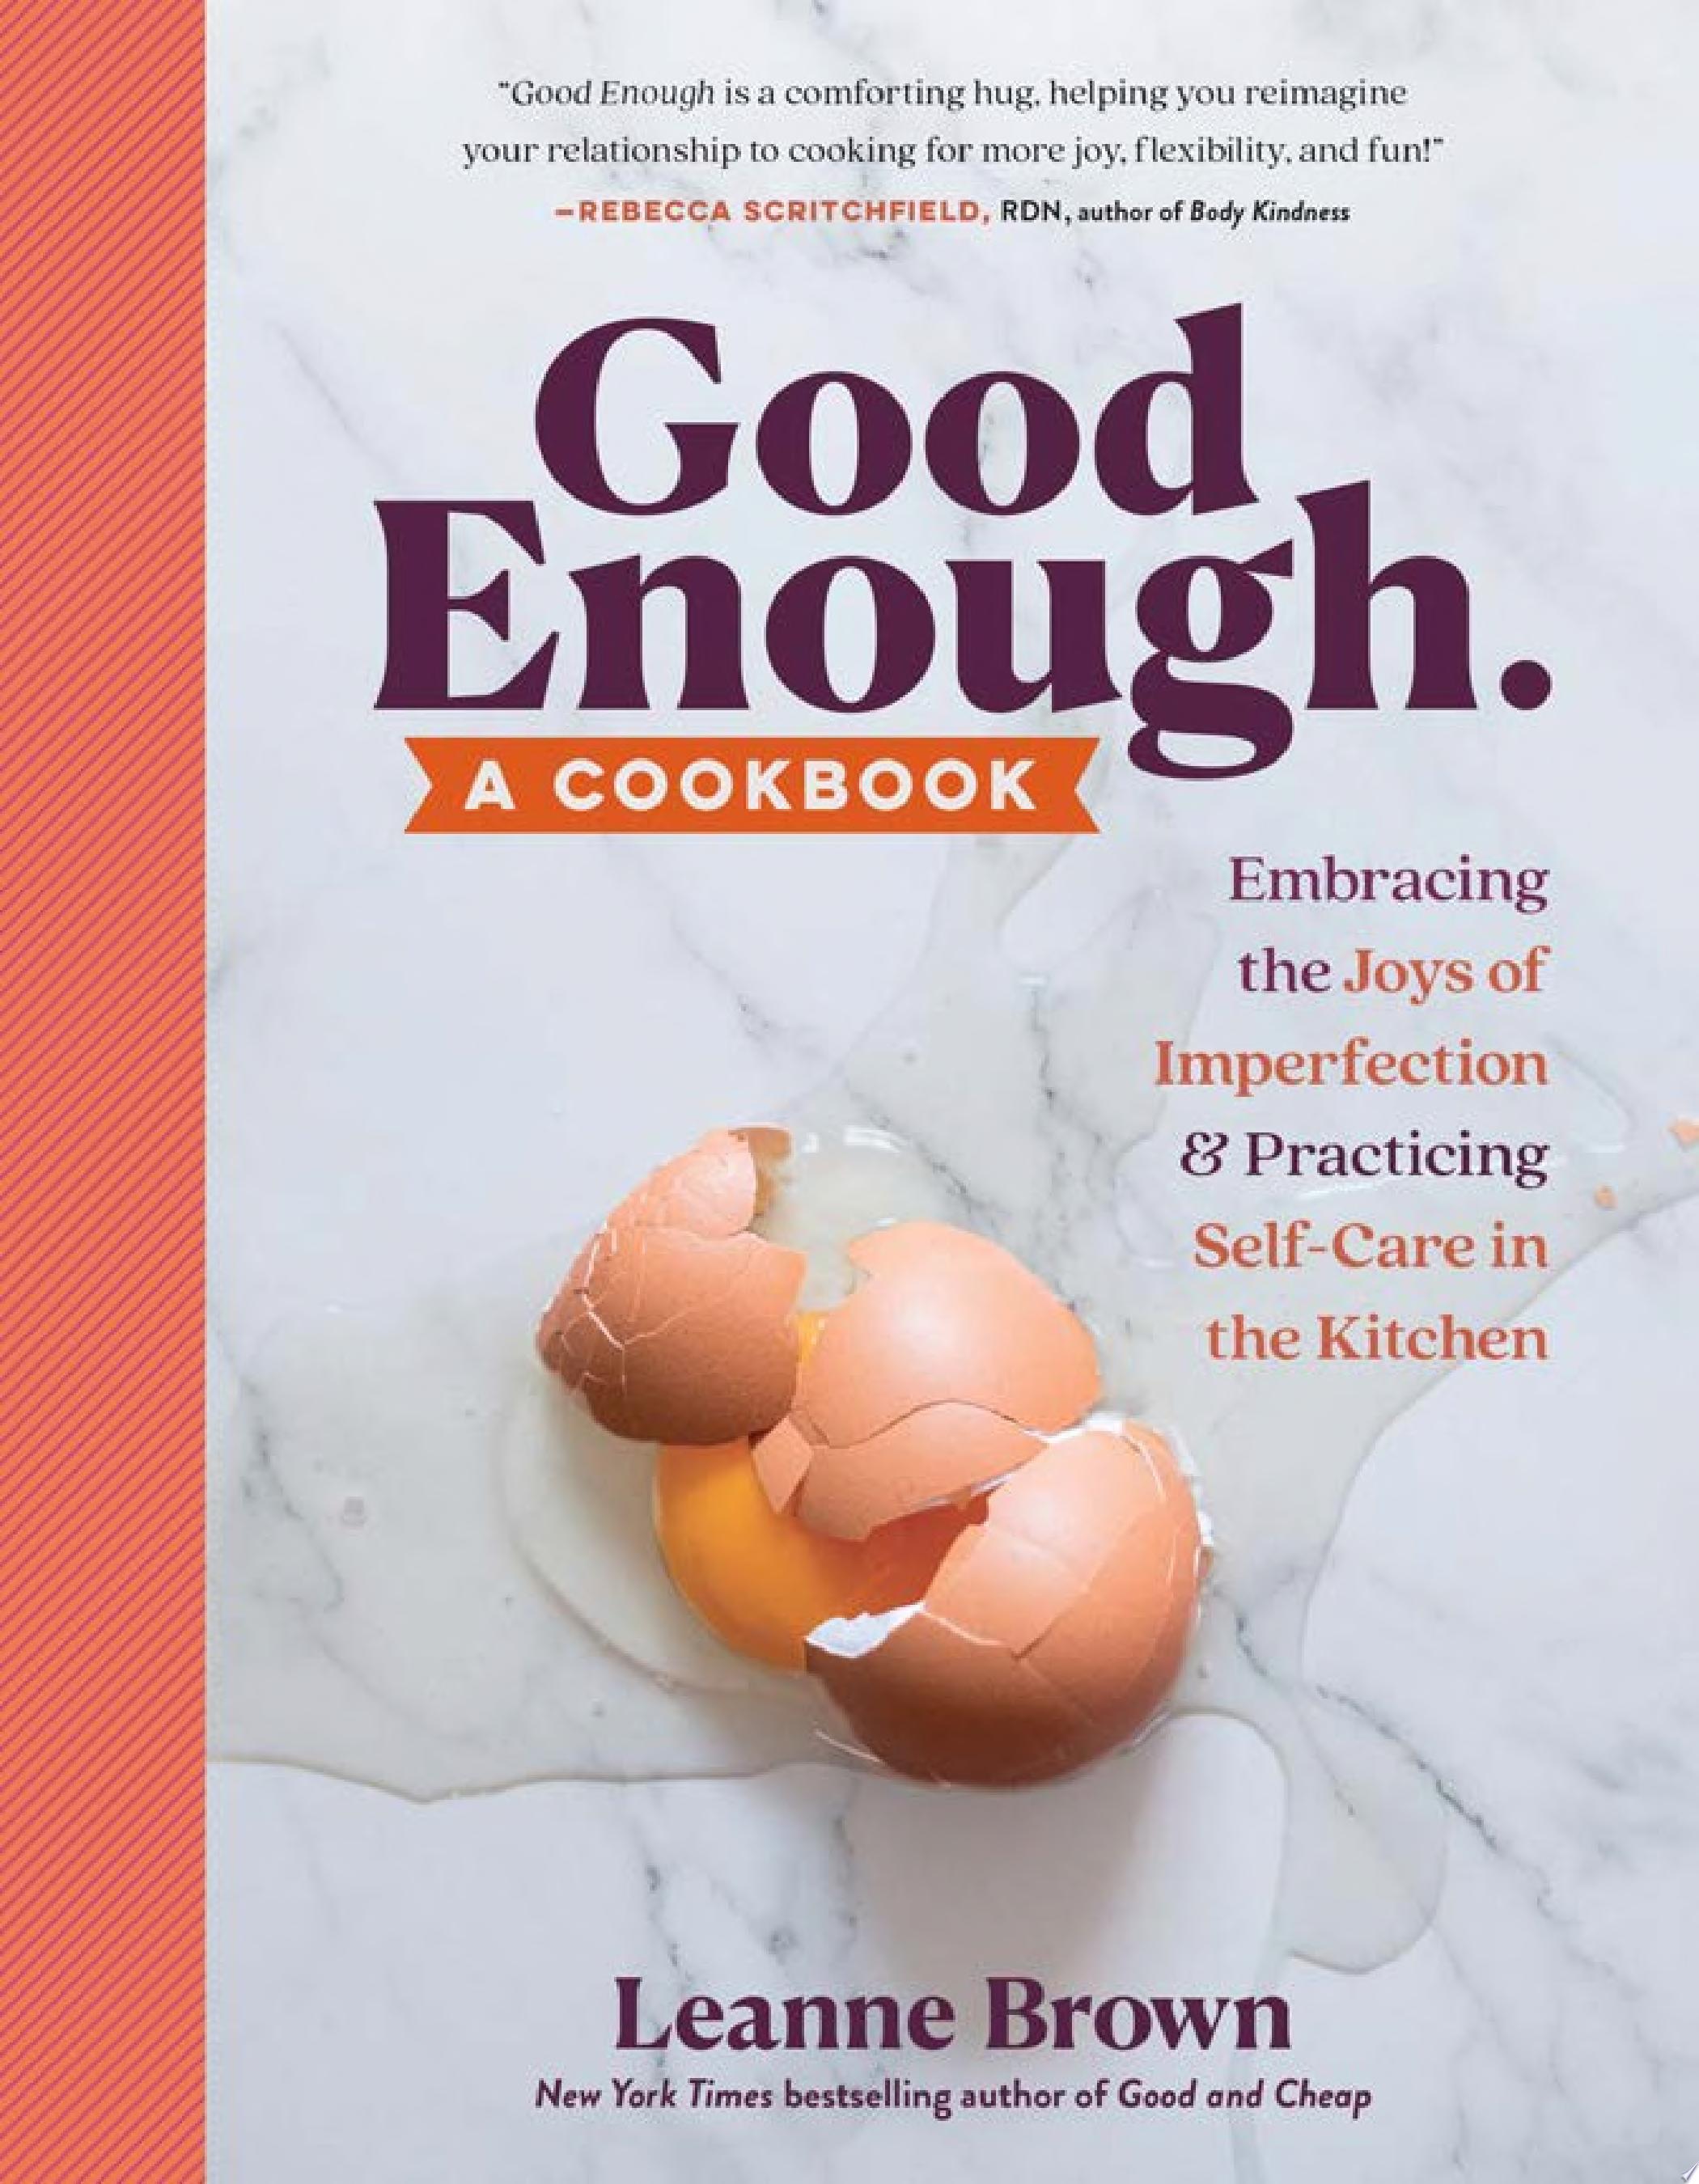 Image for "Good Enough"